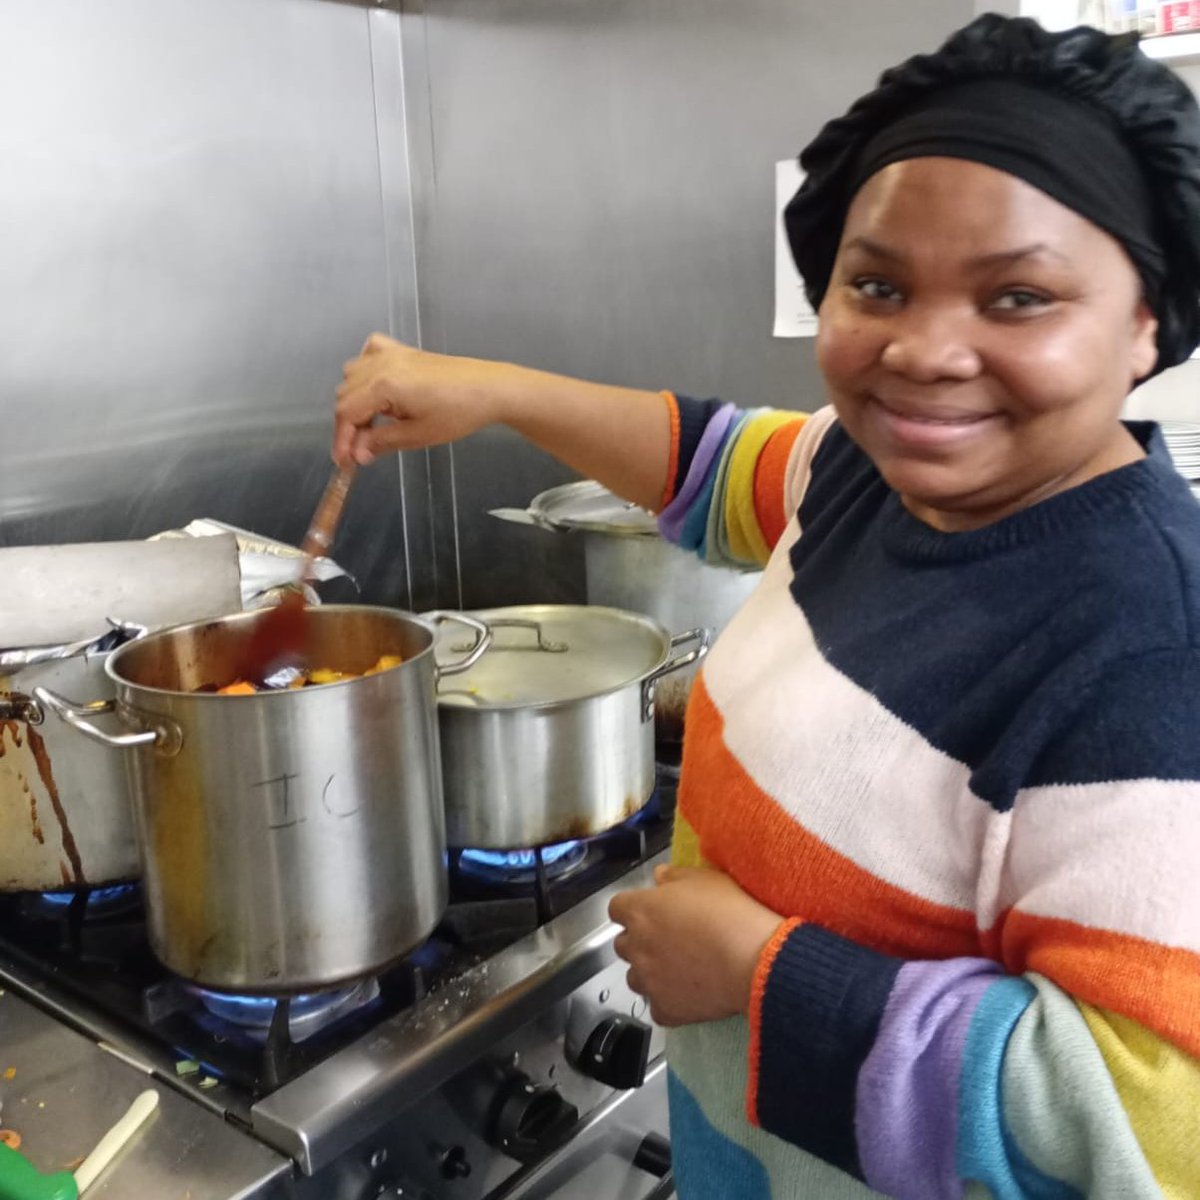 Since January we have had some incredible volunteers help prepare Wednesday lunches, including current Centre community member Ntela. She is passionate about making delicious meals, feeding others, and spreading joy through her food. A huge thank you to all!